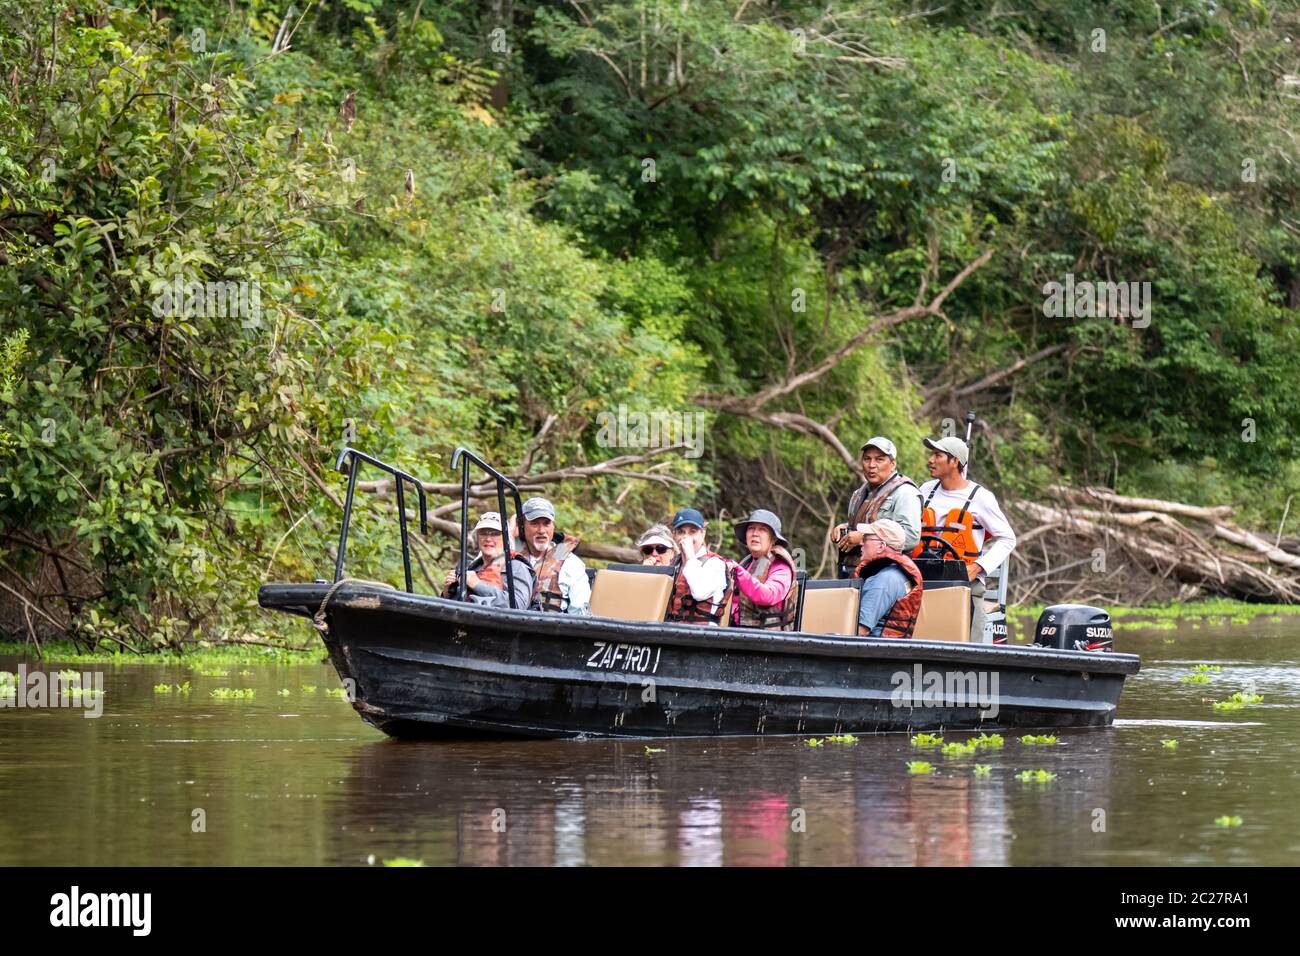 A small boat from the Expeditionary Cruise Ship Zafiro cruises the Amazon in search of wildlife Stock Photo